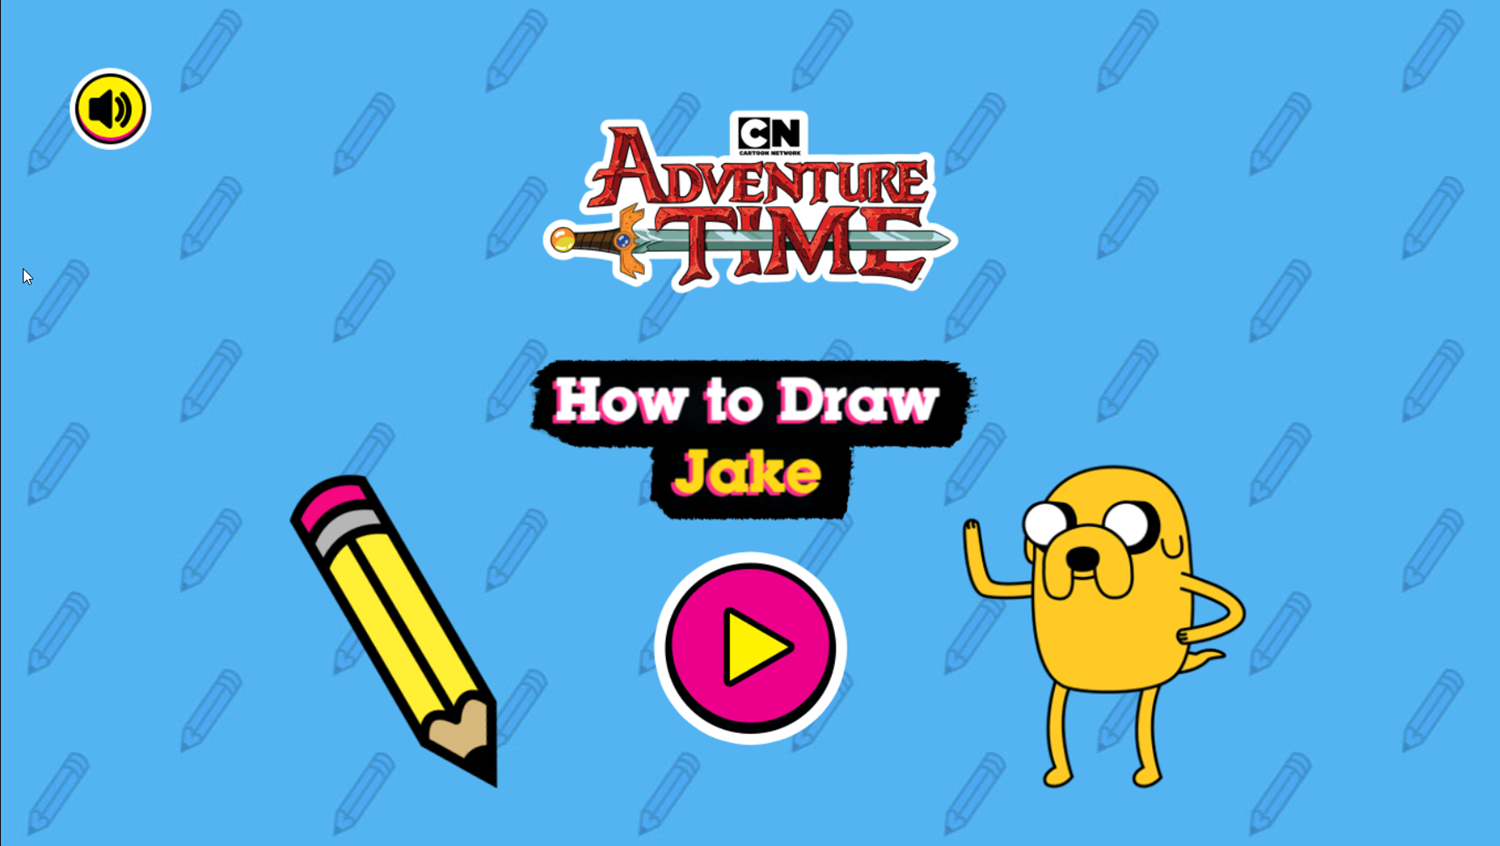 Adventure Time How to Draw Jake Game Welcome Screen Screenshot.